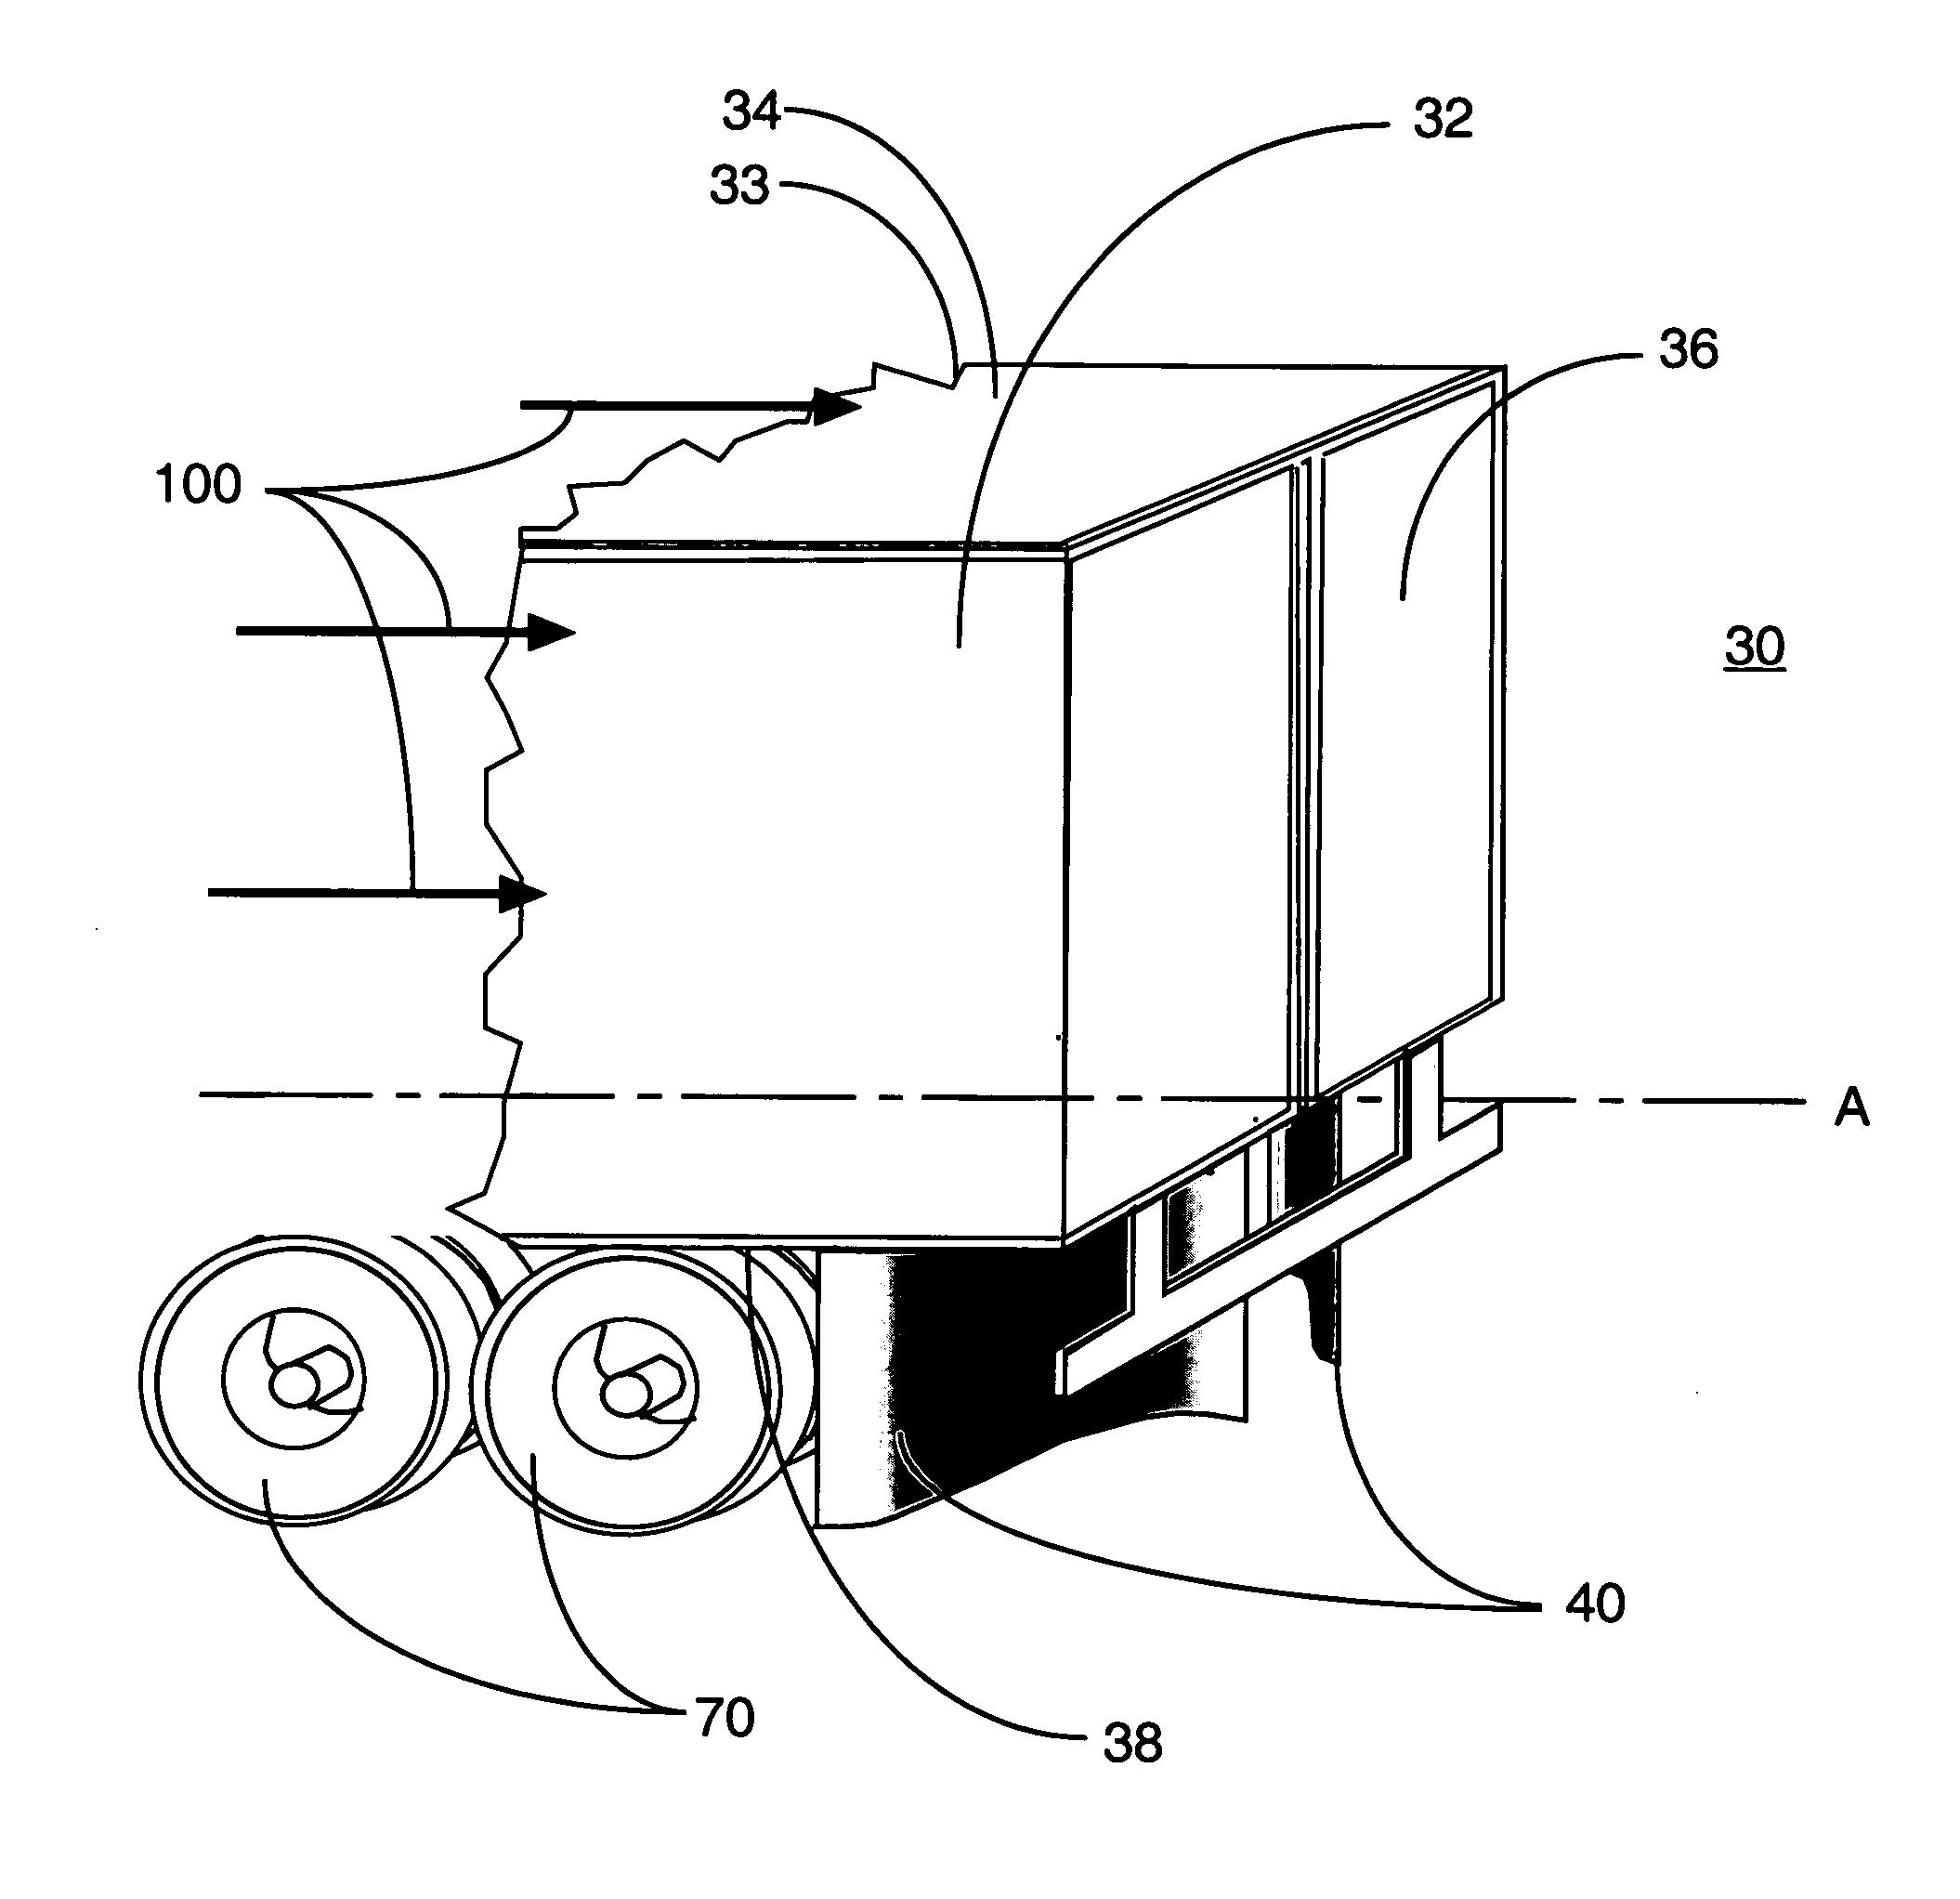 Undercarriage flow control device and method for reducing the aerodynamic drag of ground vehicles